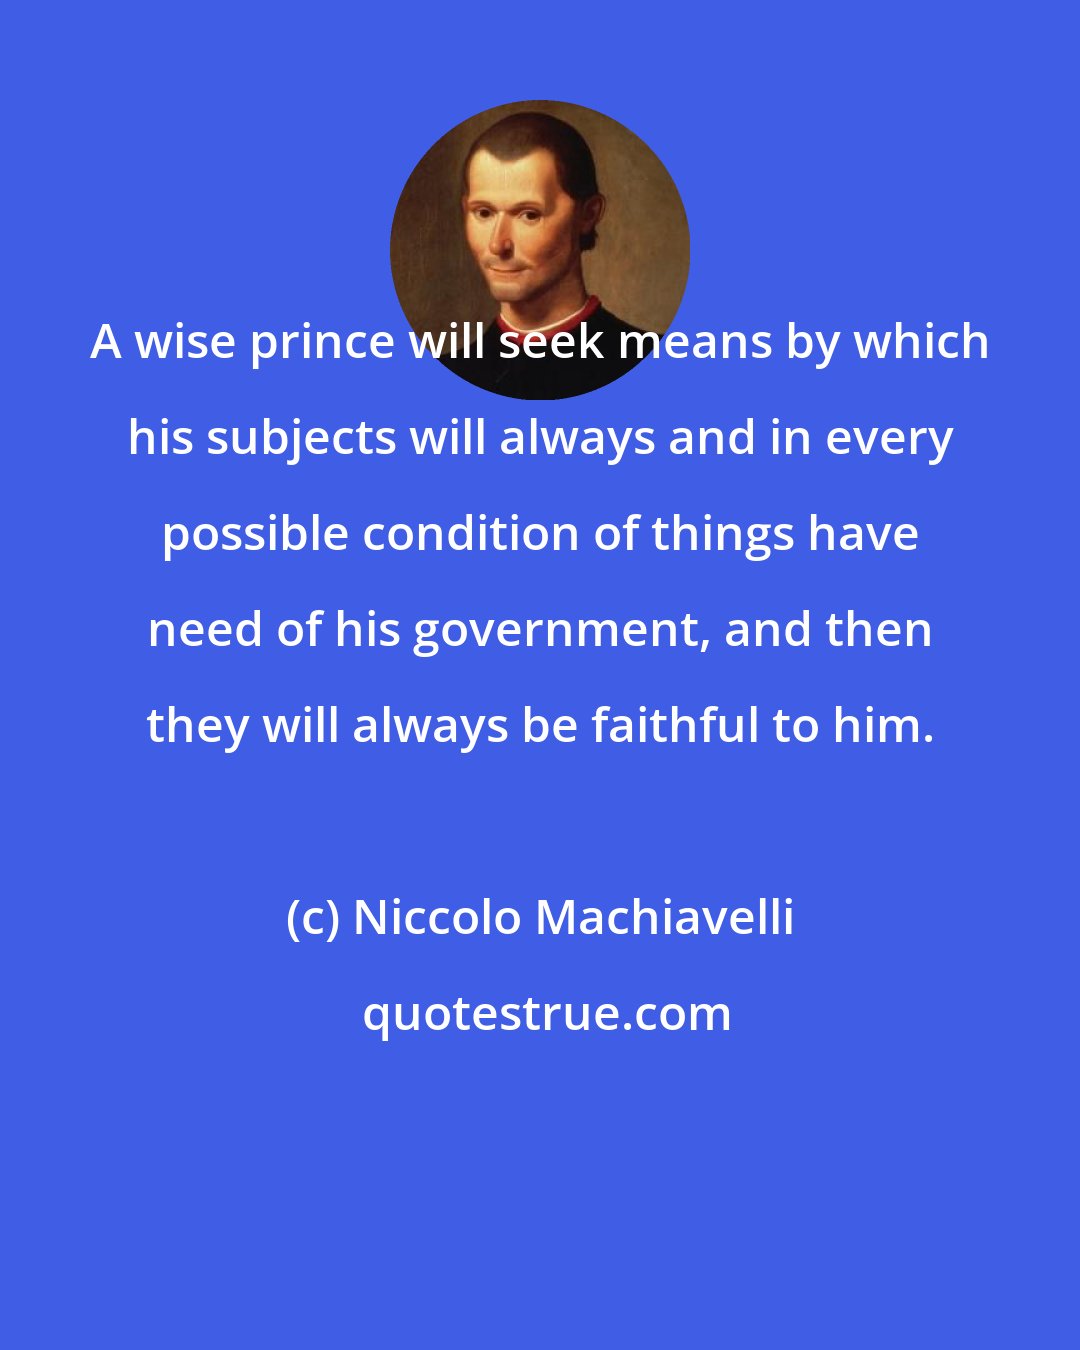 Niccolo Machiavelli: A wise prince will seek means by which his subjects will always and in every possible condition of things have need of his government, and then they will always be faithful to him.